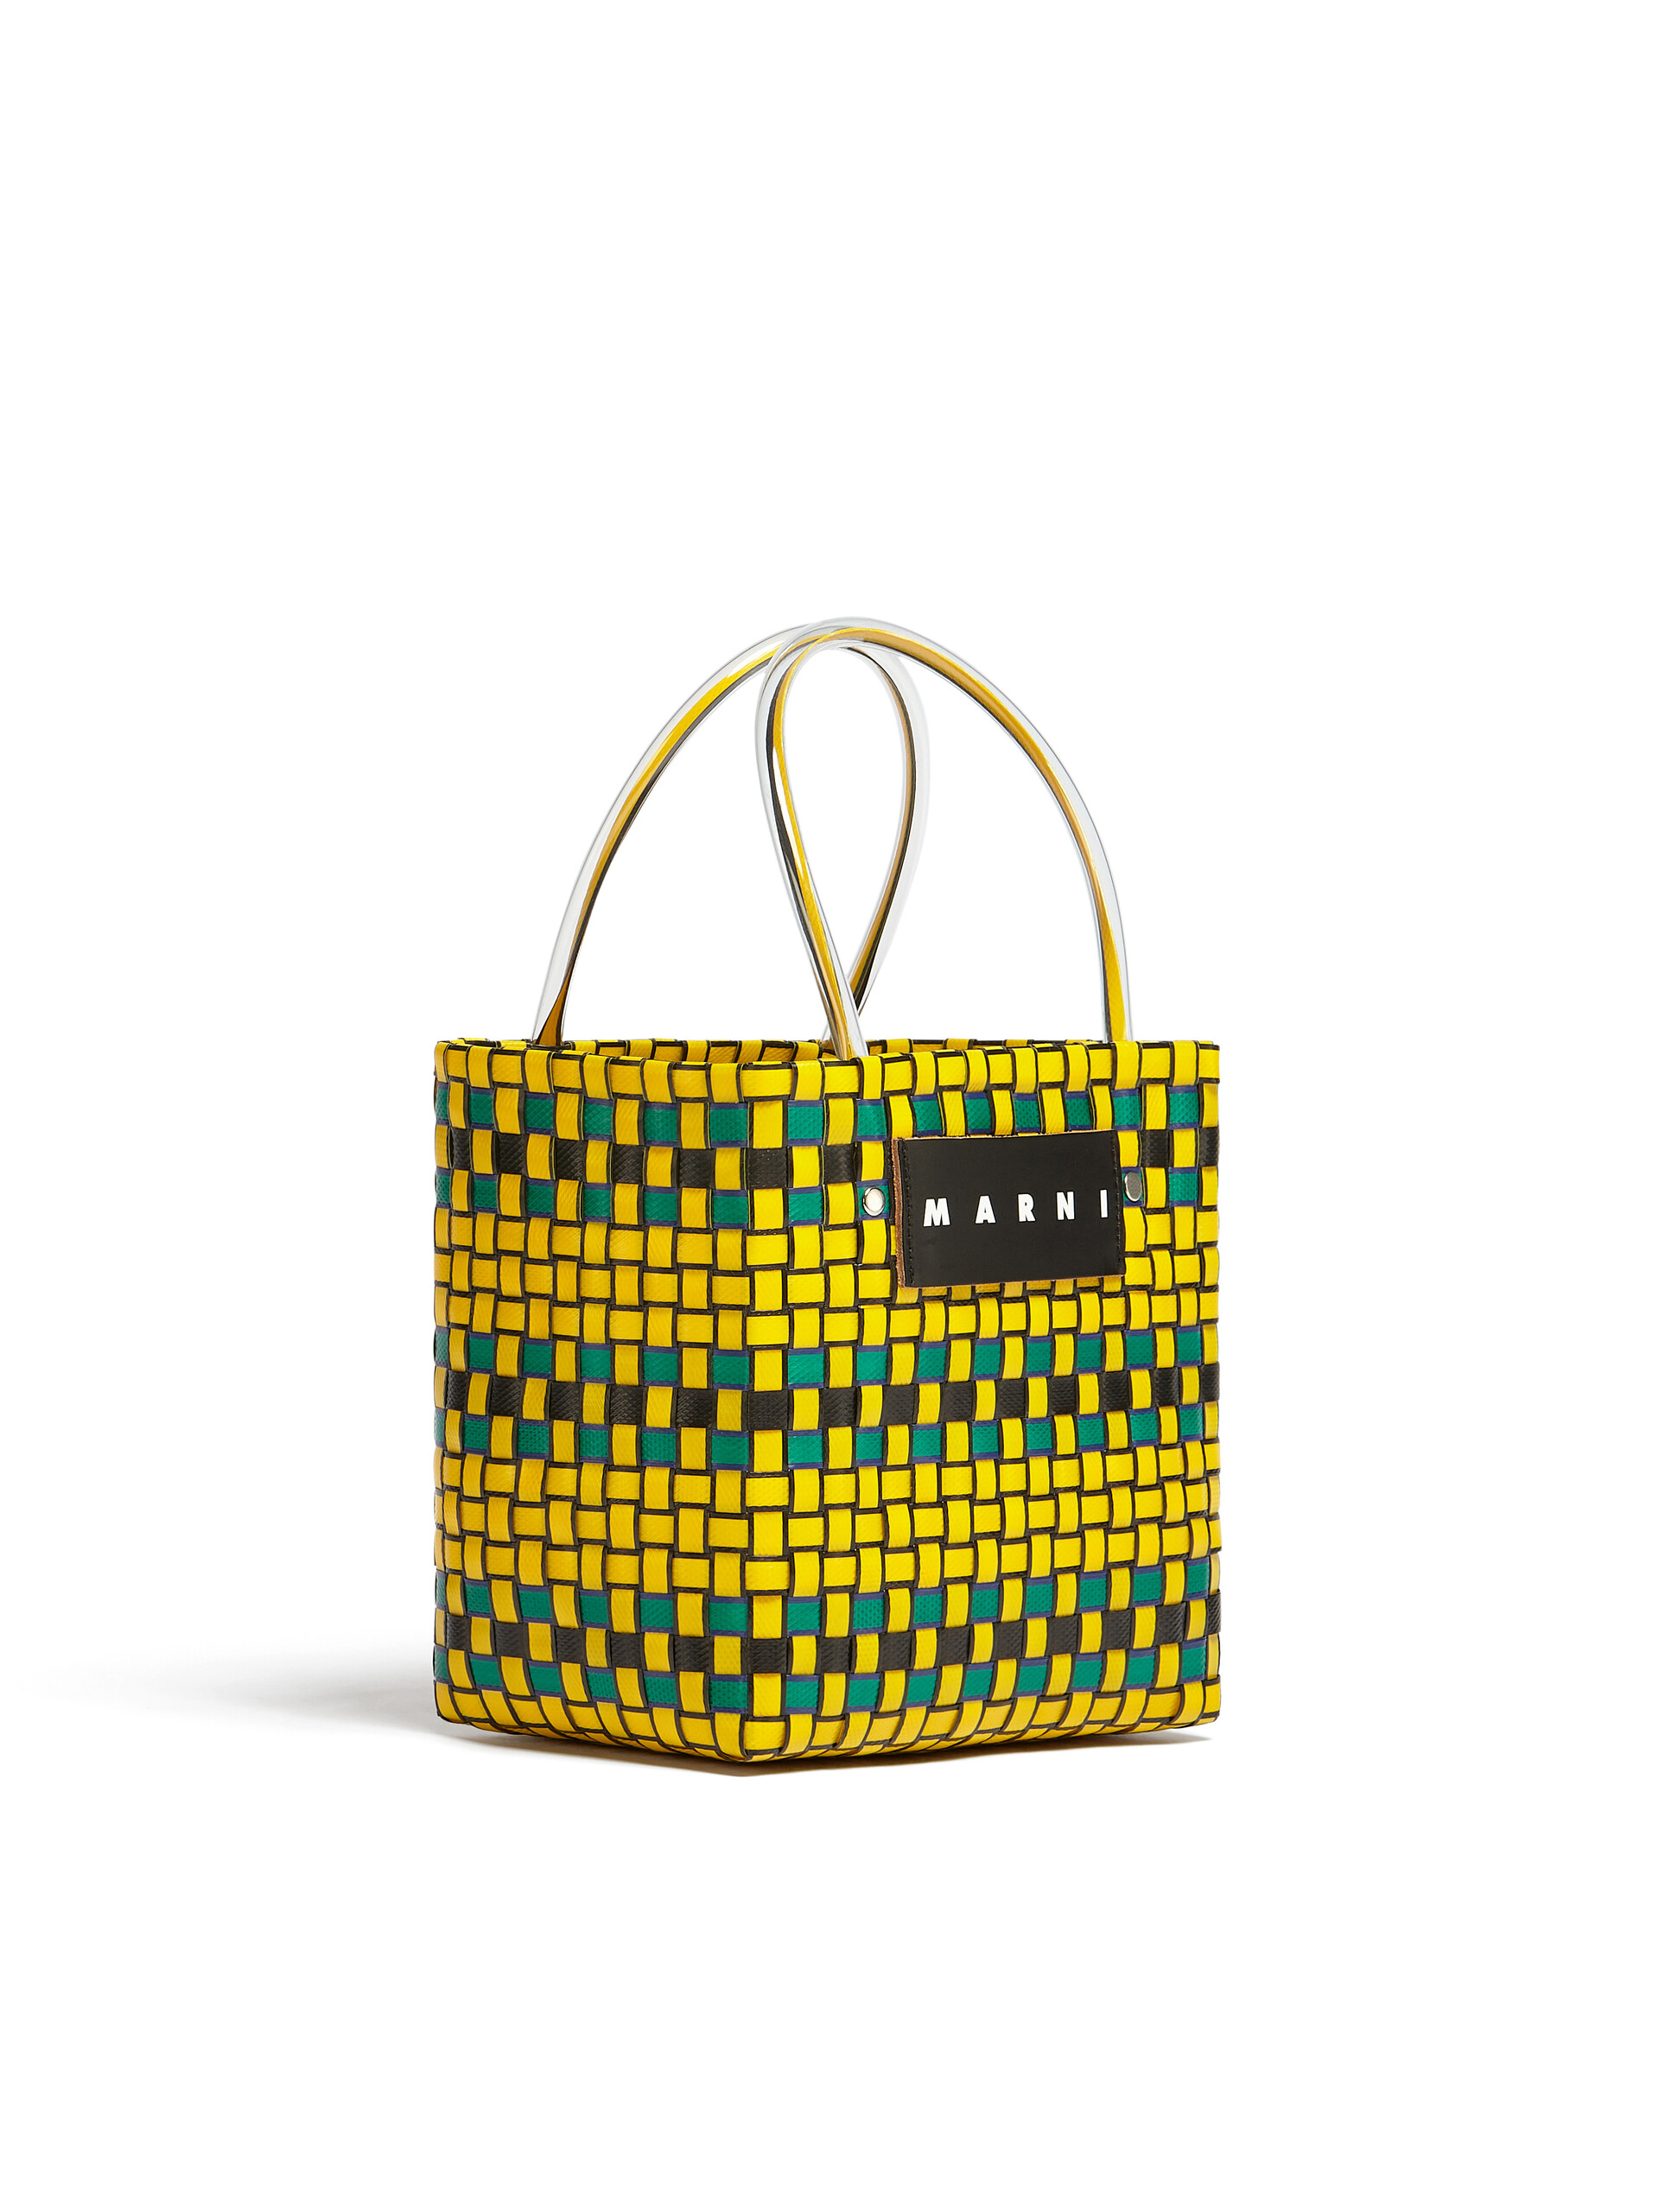 MARNI MARKET BASKET bag in yellow woven material - Shopping Bags - Image 2